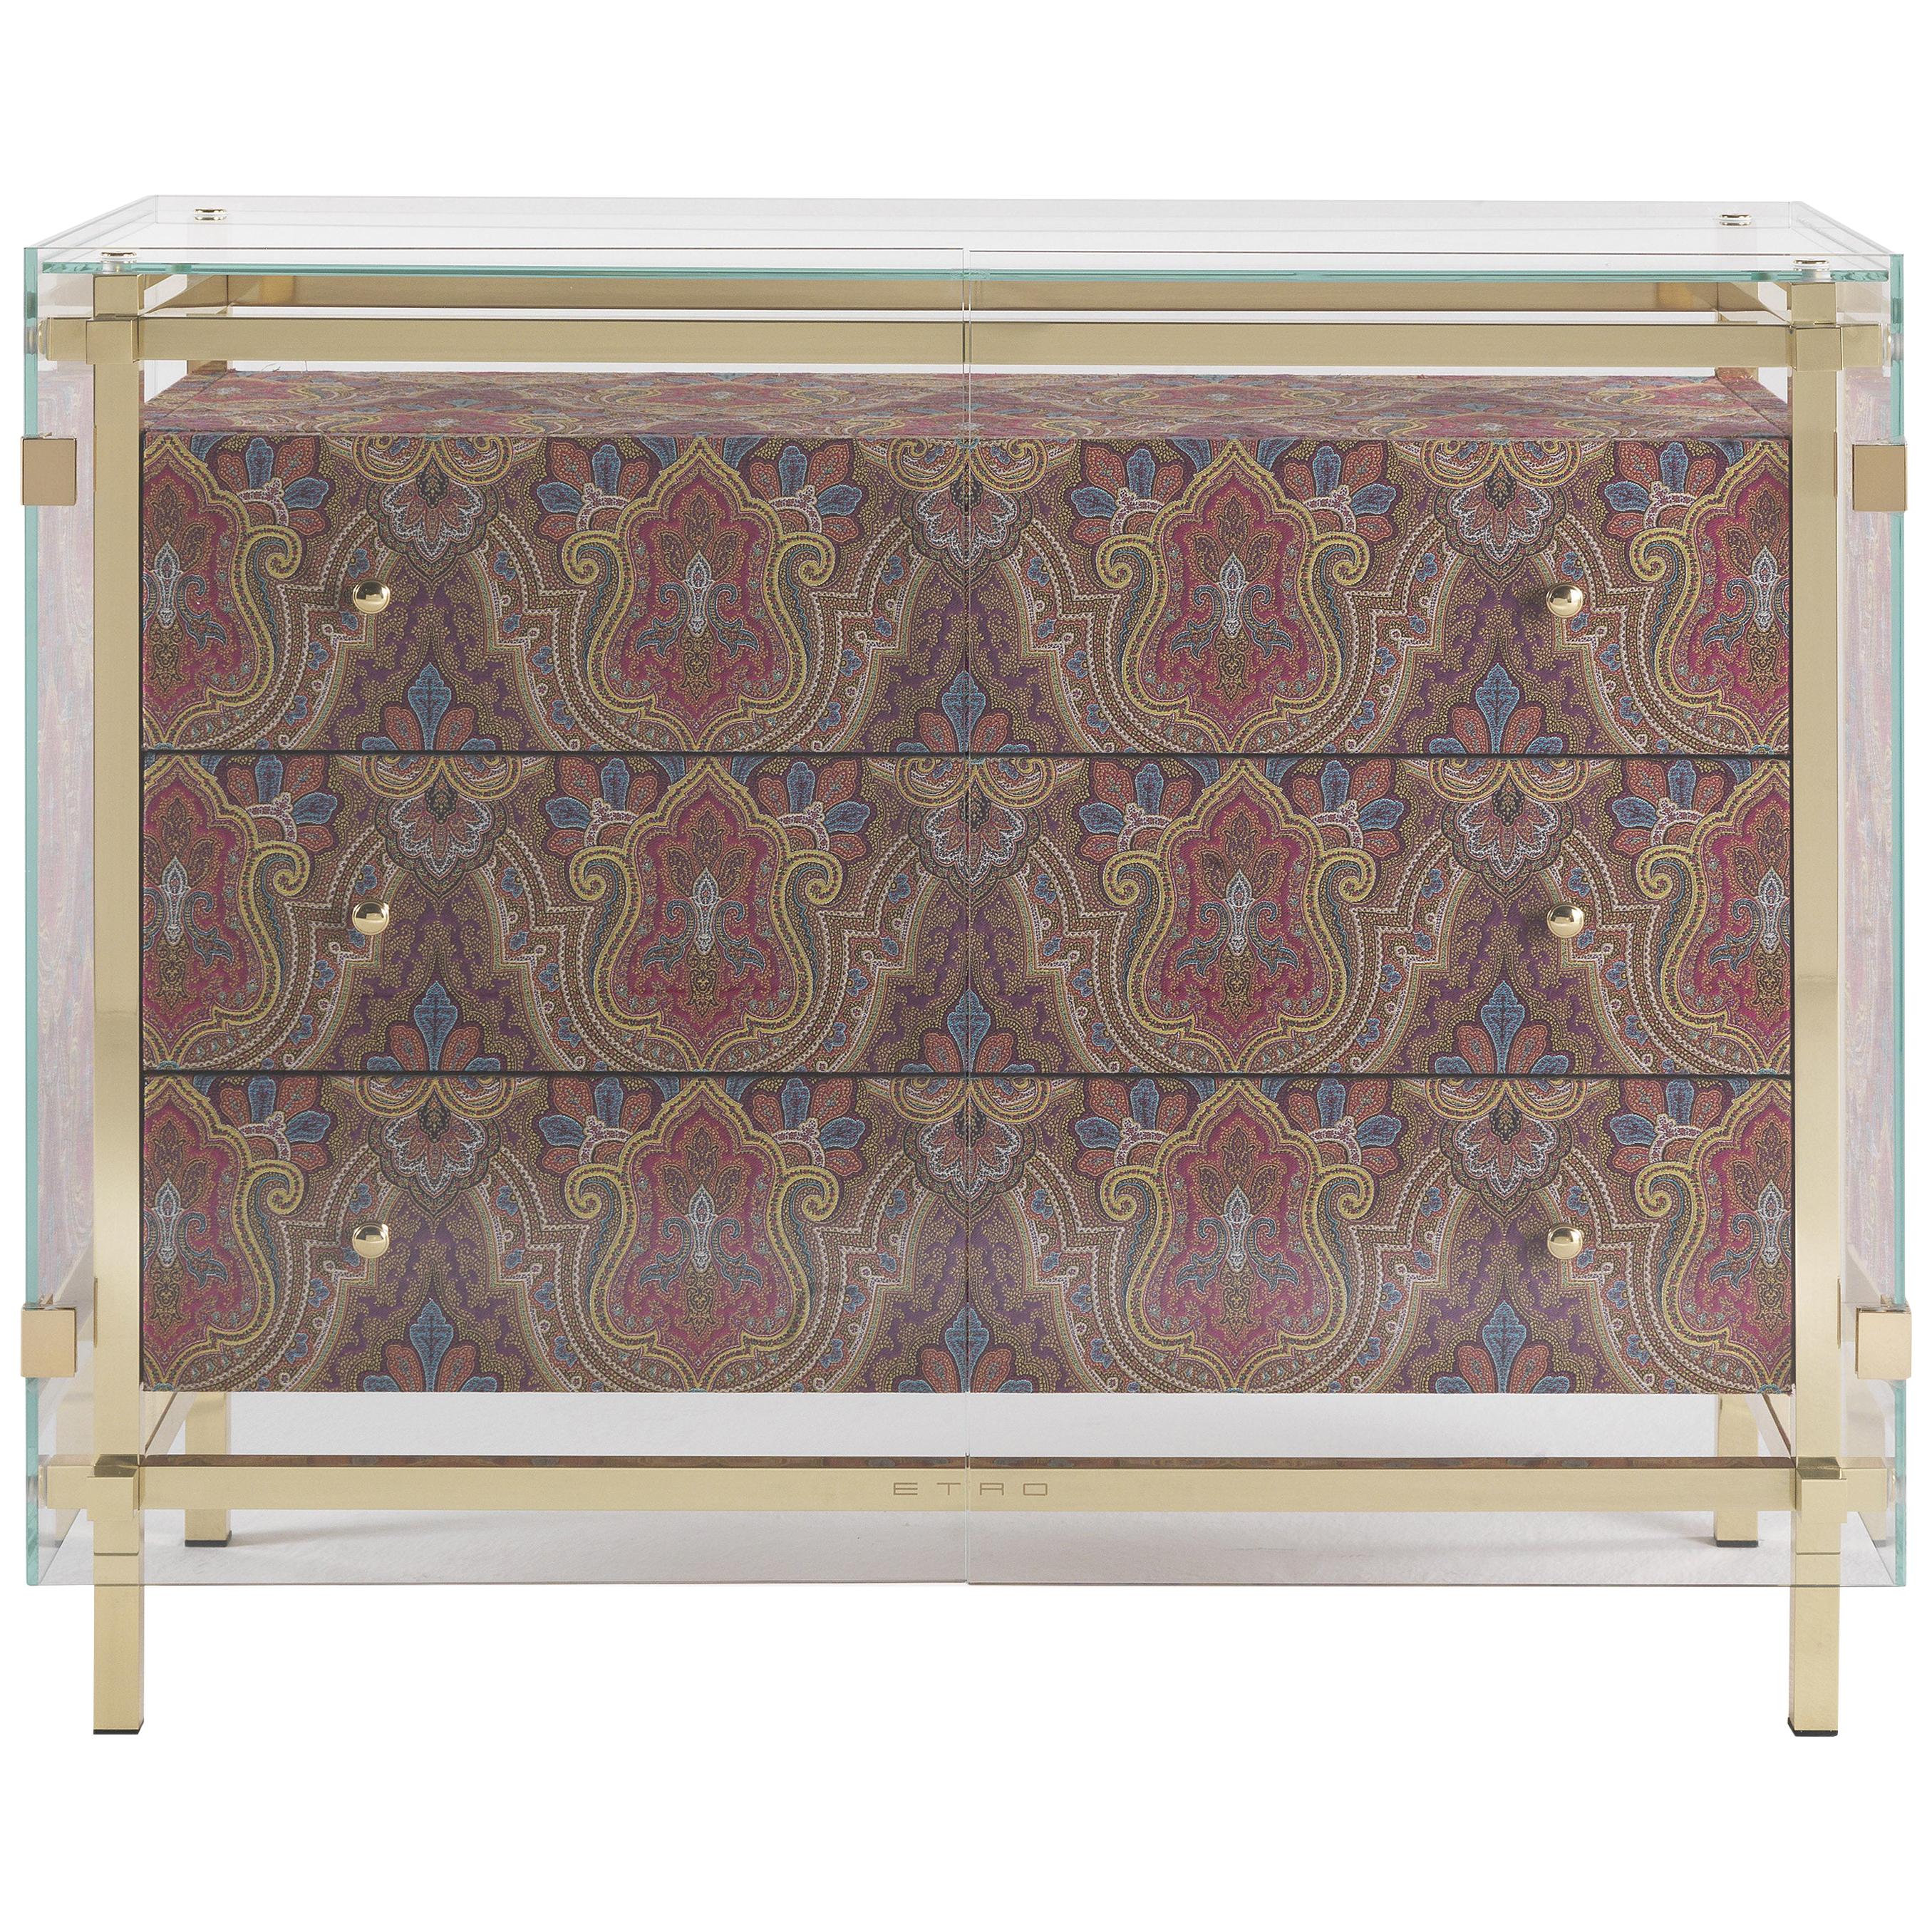 Etro Home Interiors Delhi Chest of Drawers in Fabric and Polished Brass